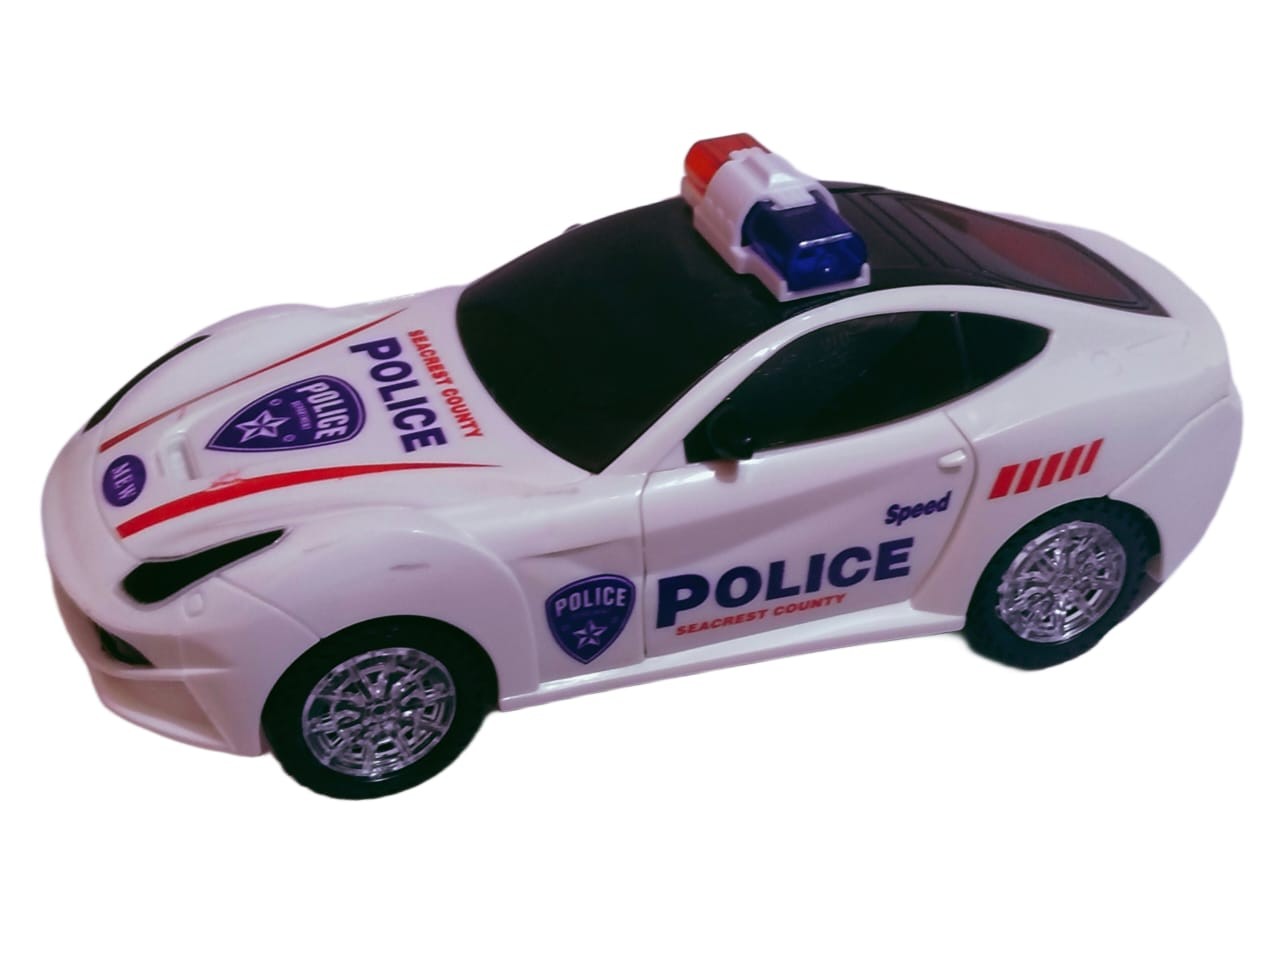 Police Car Toy for Kids - Bump and Go Cop Car with Fun Flashing Lights in The Wheels and Realistic Sounds with Sirens